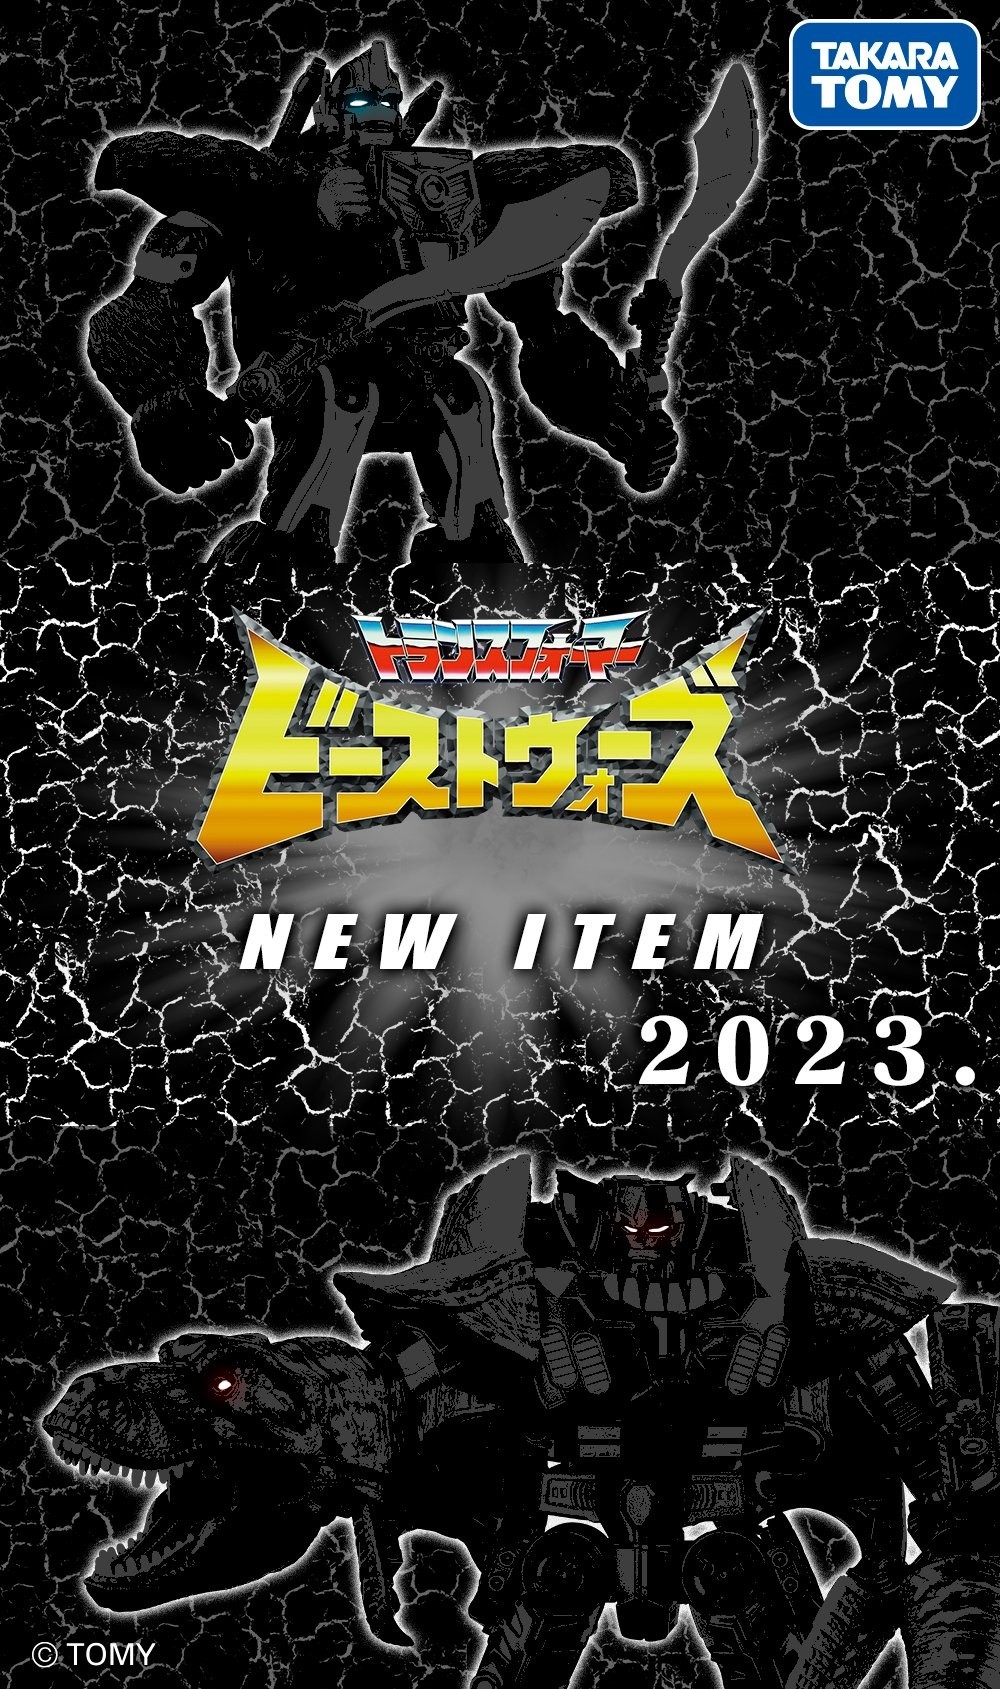 Transformers News: Takara Tomy Teases Potential Canon Camera Collaboration Nemesis Prime Reveal for March 9